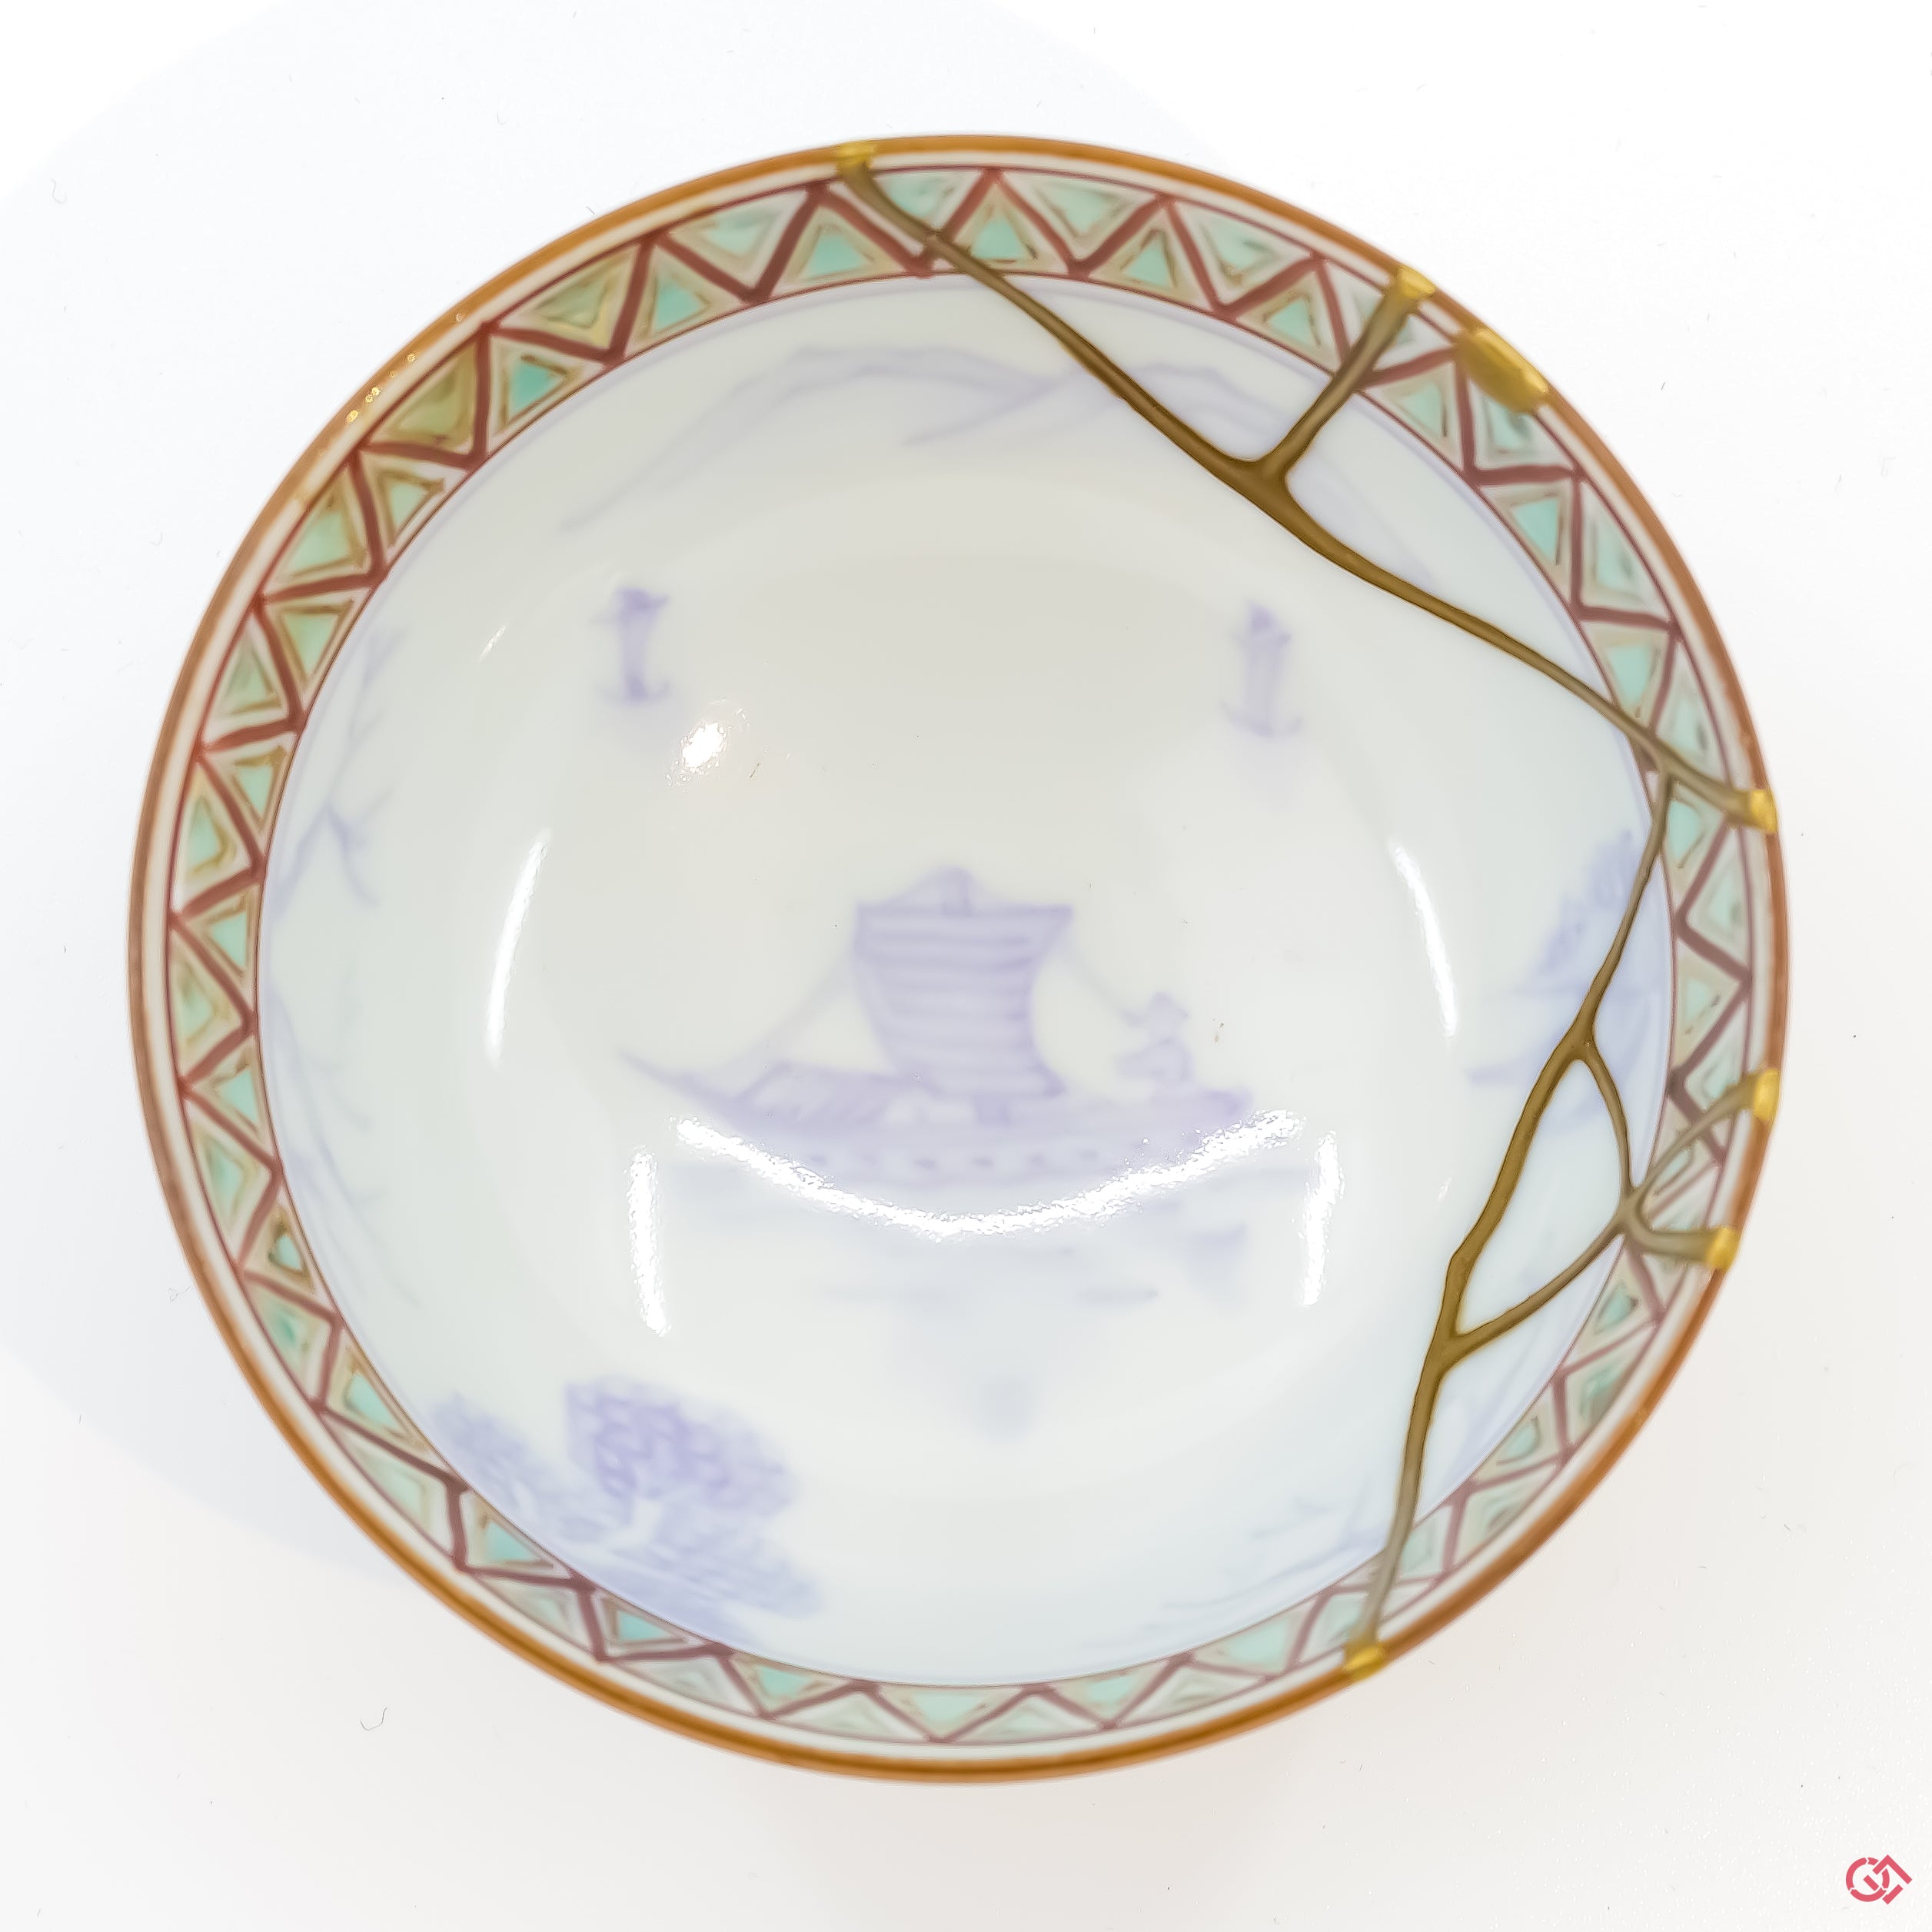 Photo of the top side of an authentic Kintsugi pottery, showing its overall design and features